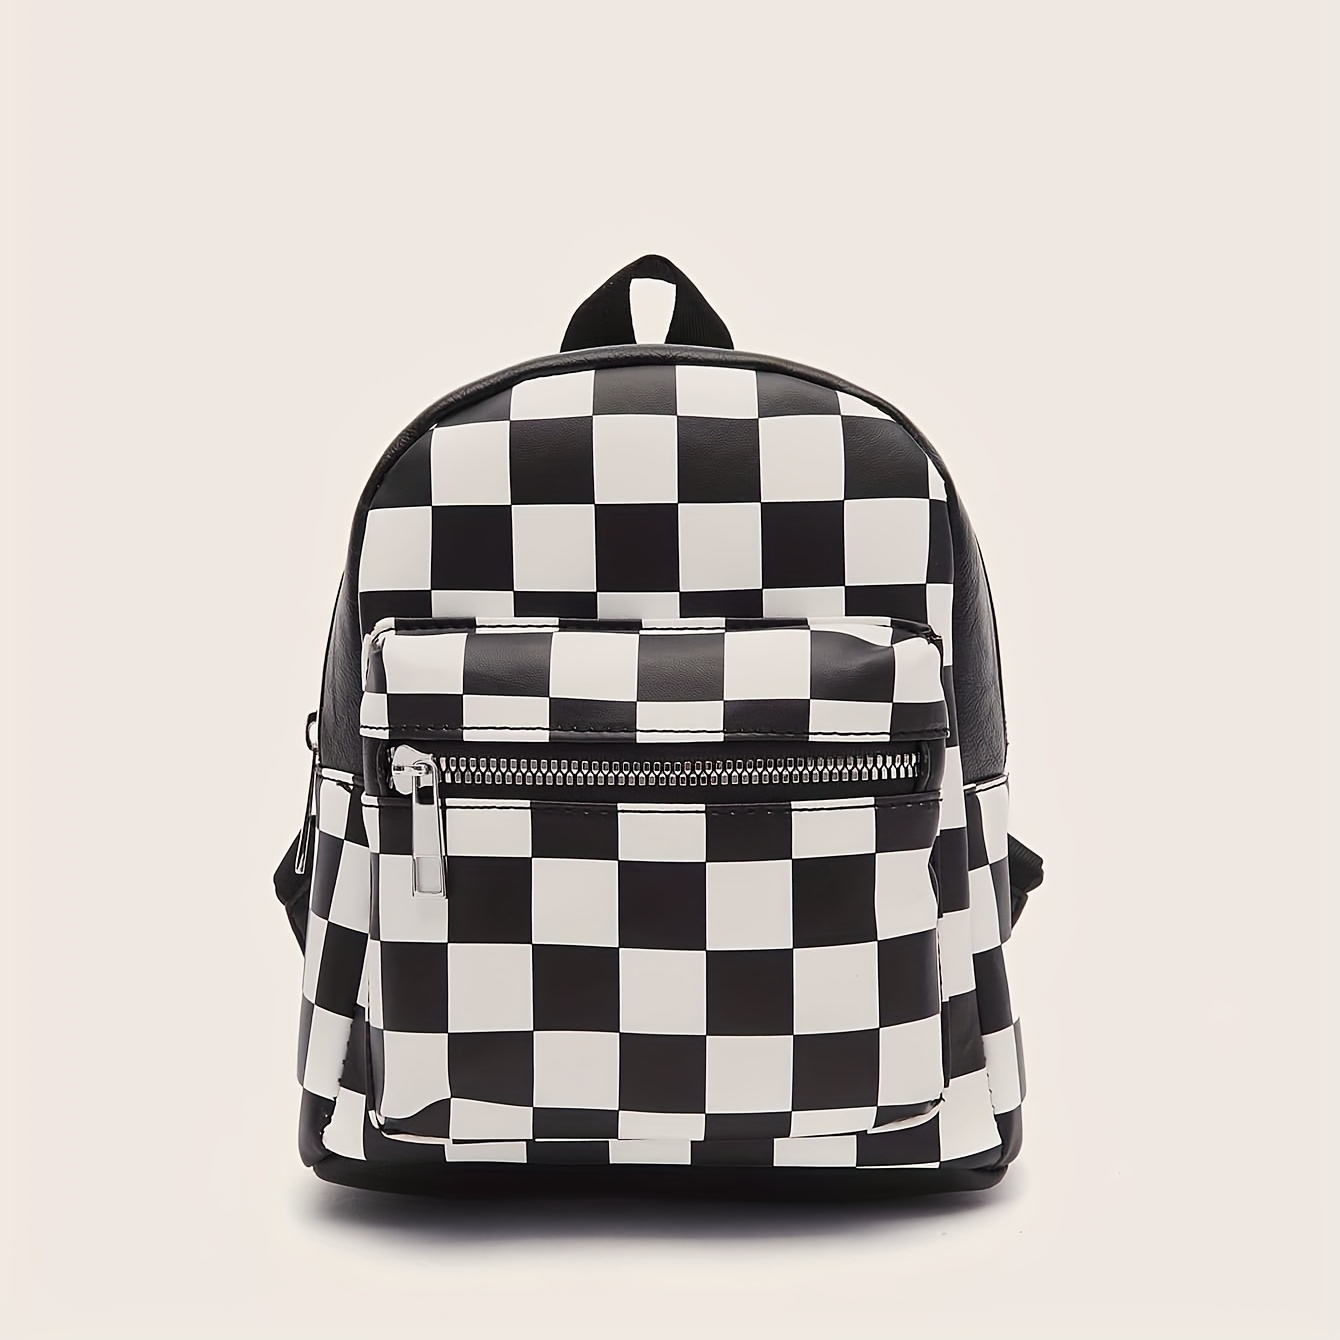 checkered backpack for women mini faux leather daypack plaid pattern travel school bag